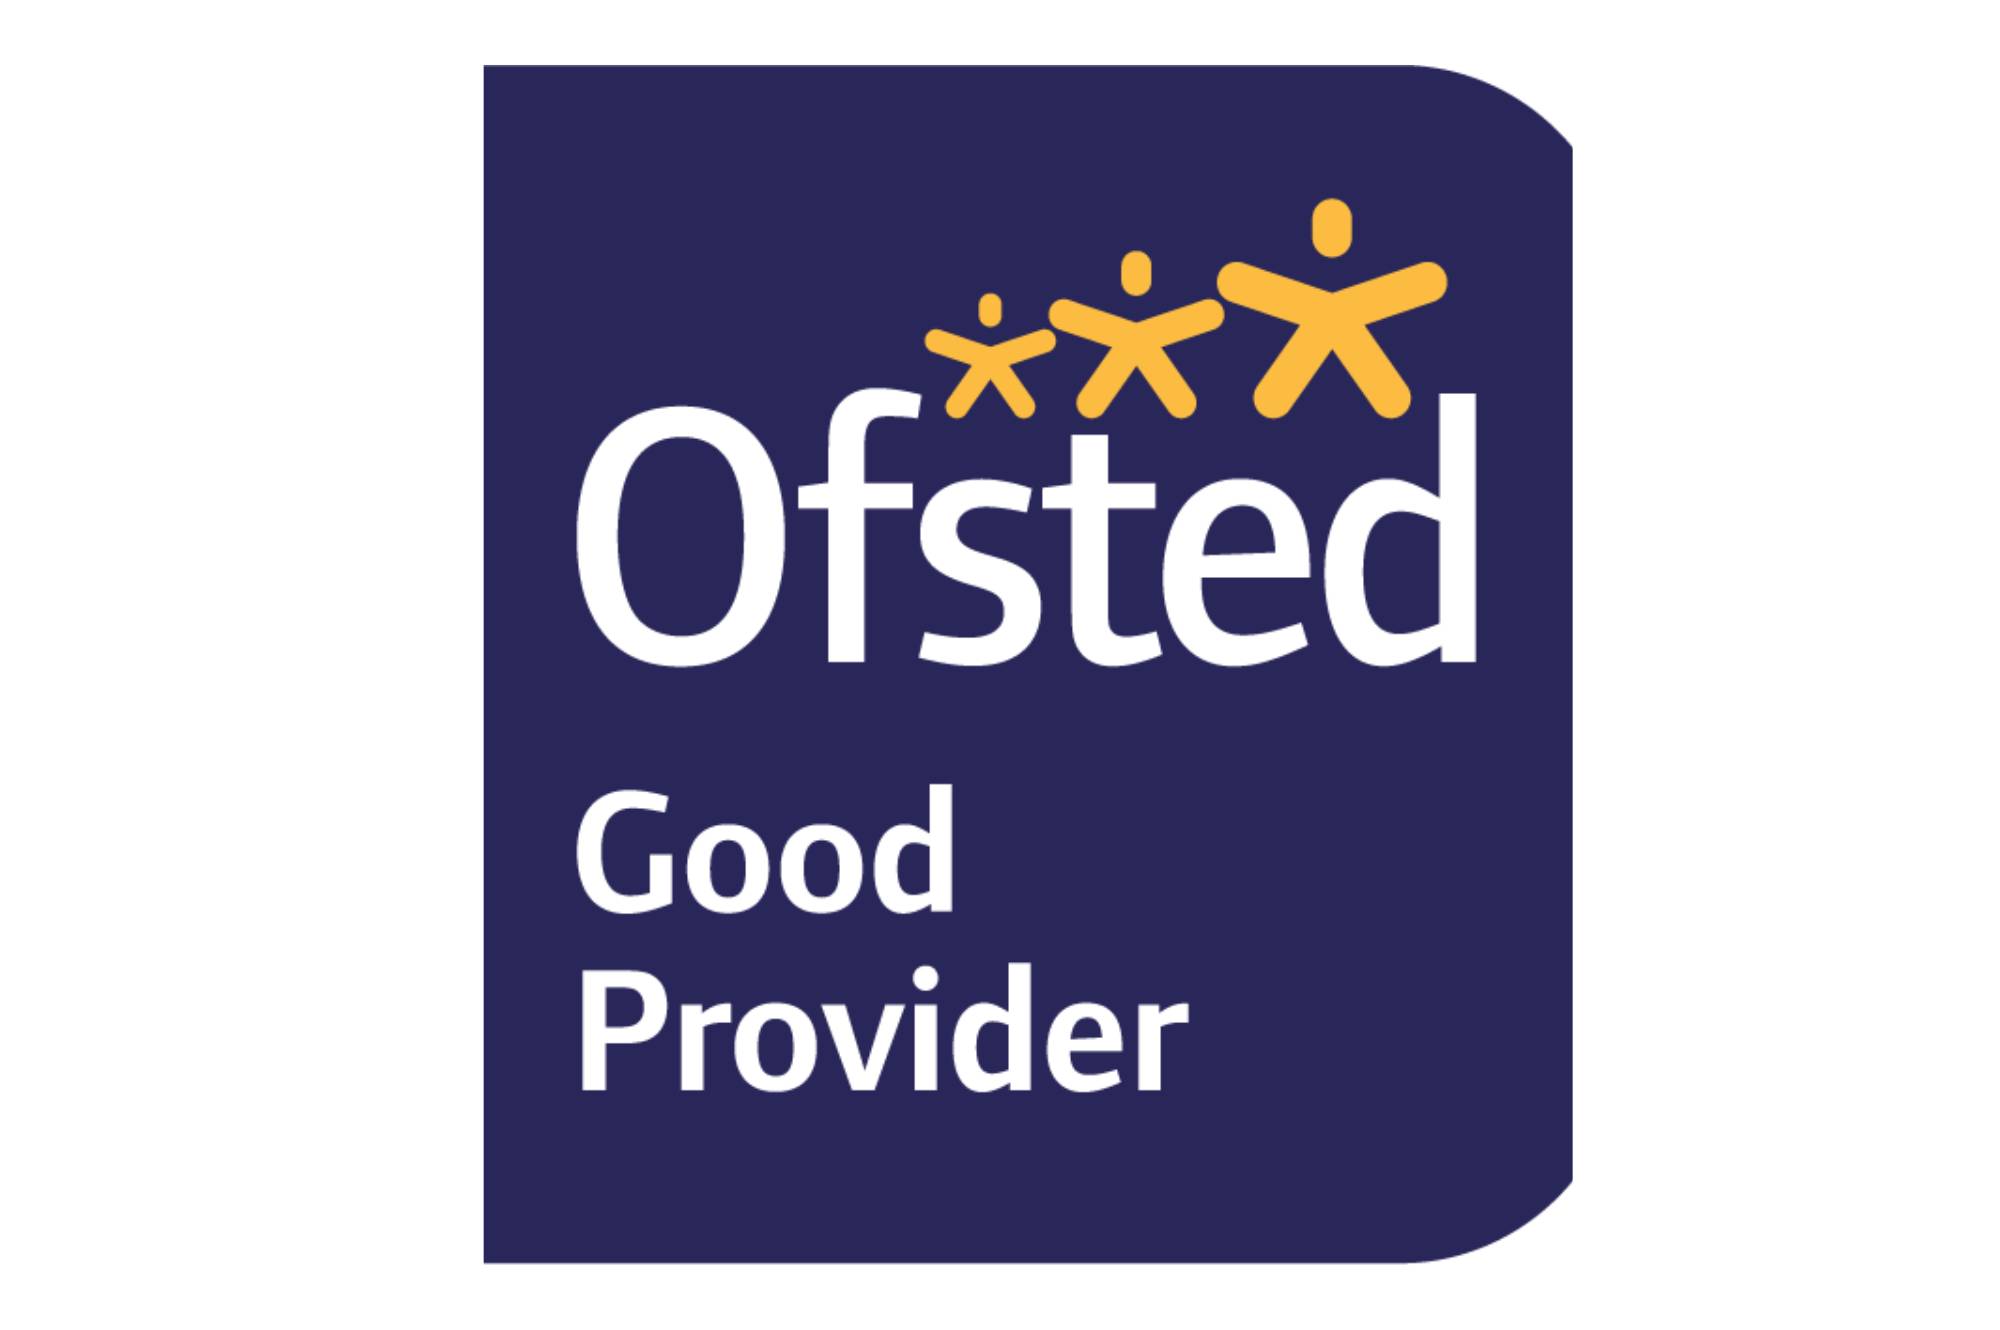 Leading apprenticeship provider JTL retains ‘Good’ Ofsted rating